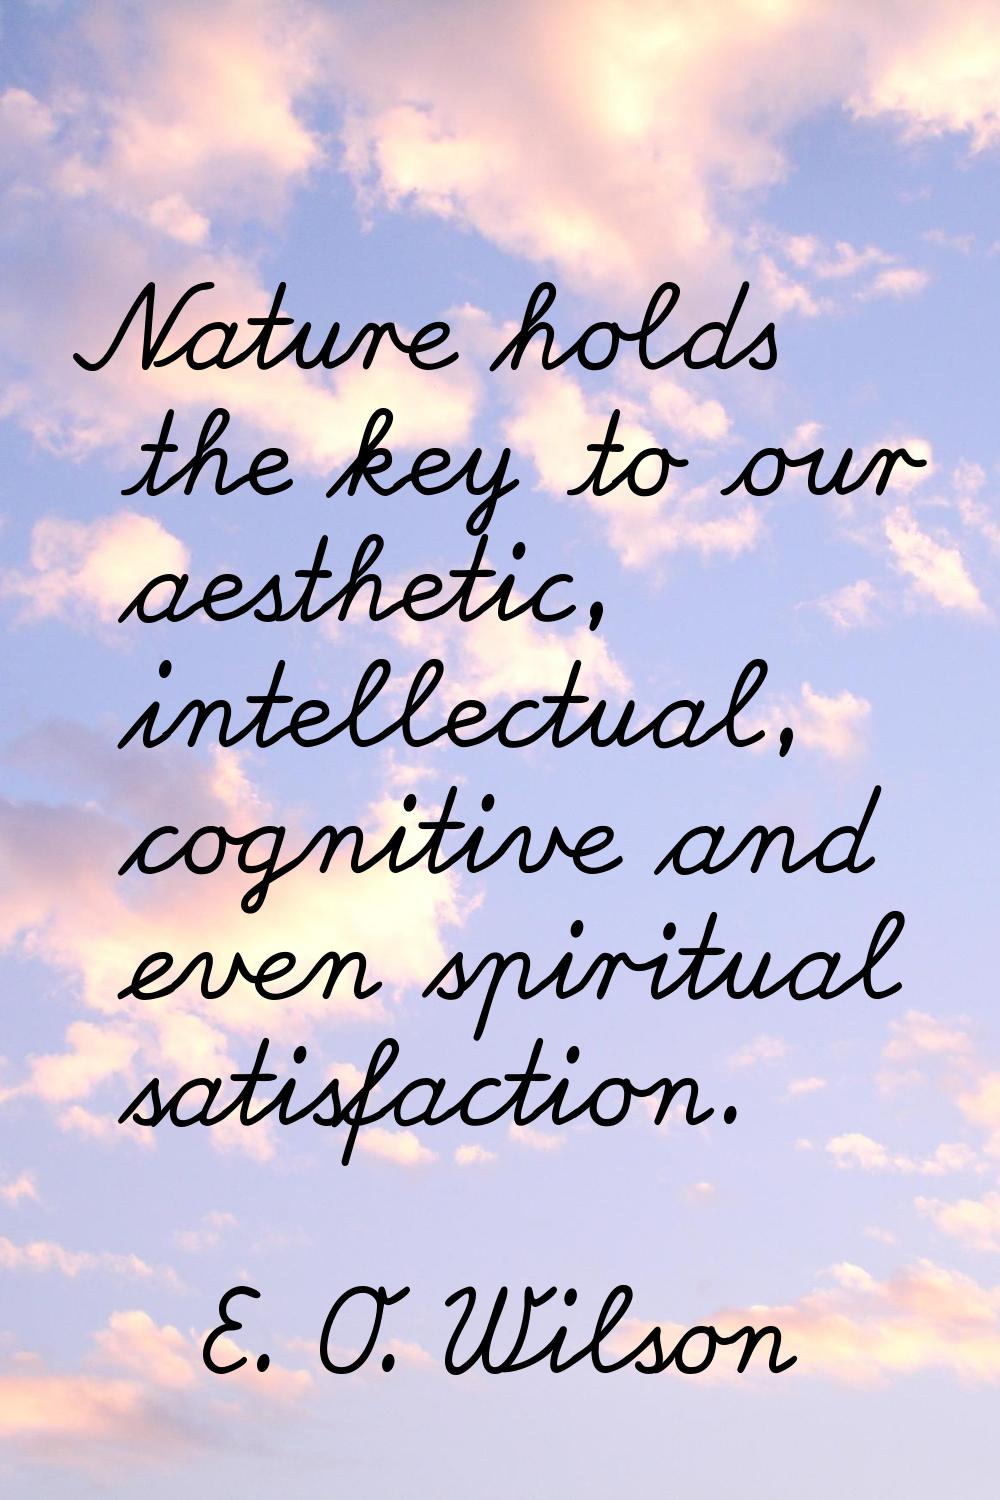 Nature holds the key to our aesthetic, intellectual, cognitive and even spiritual satisfaction.